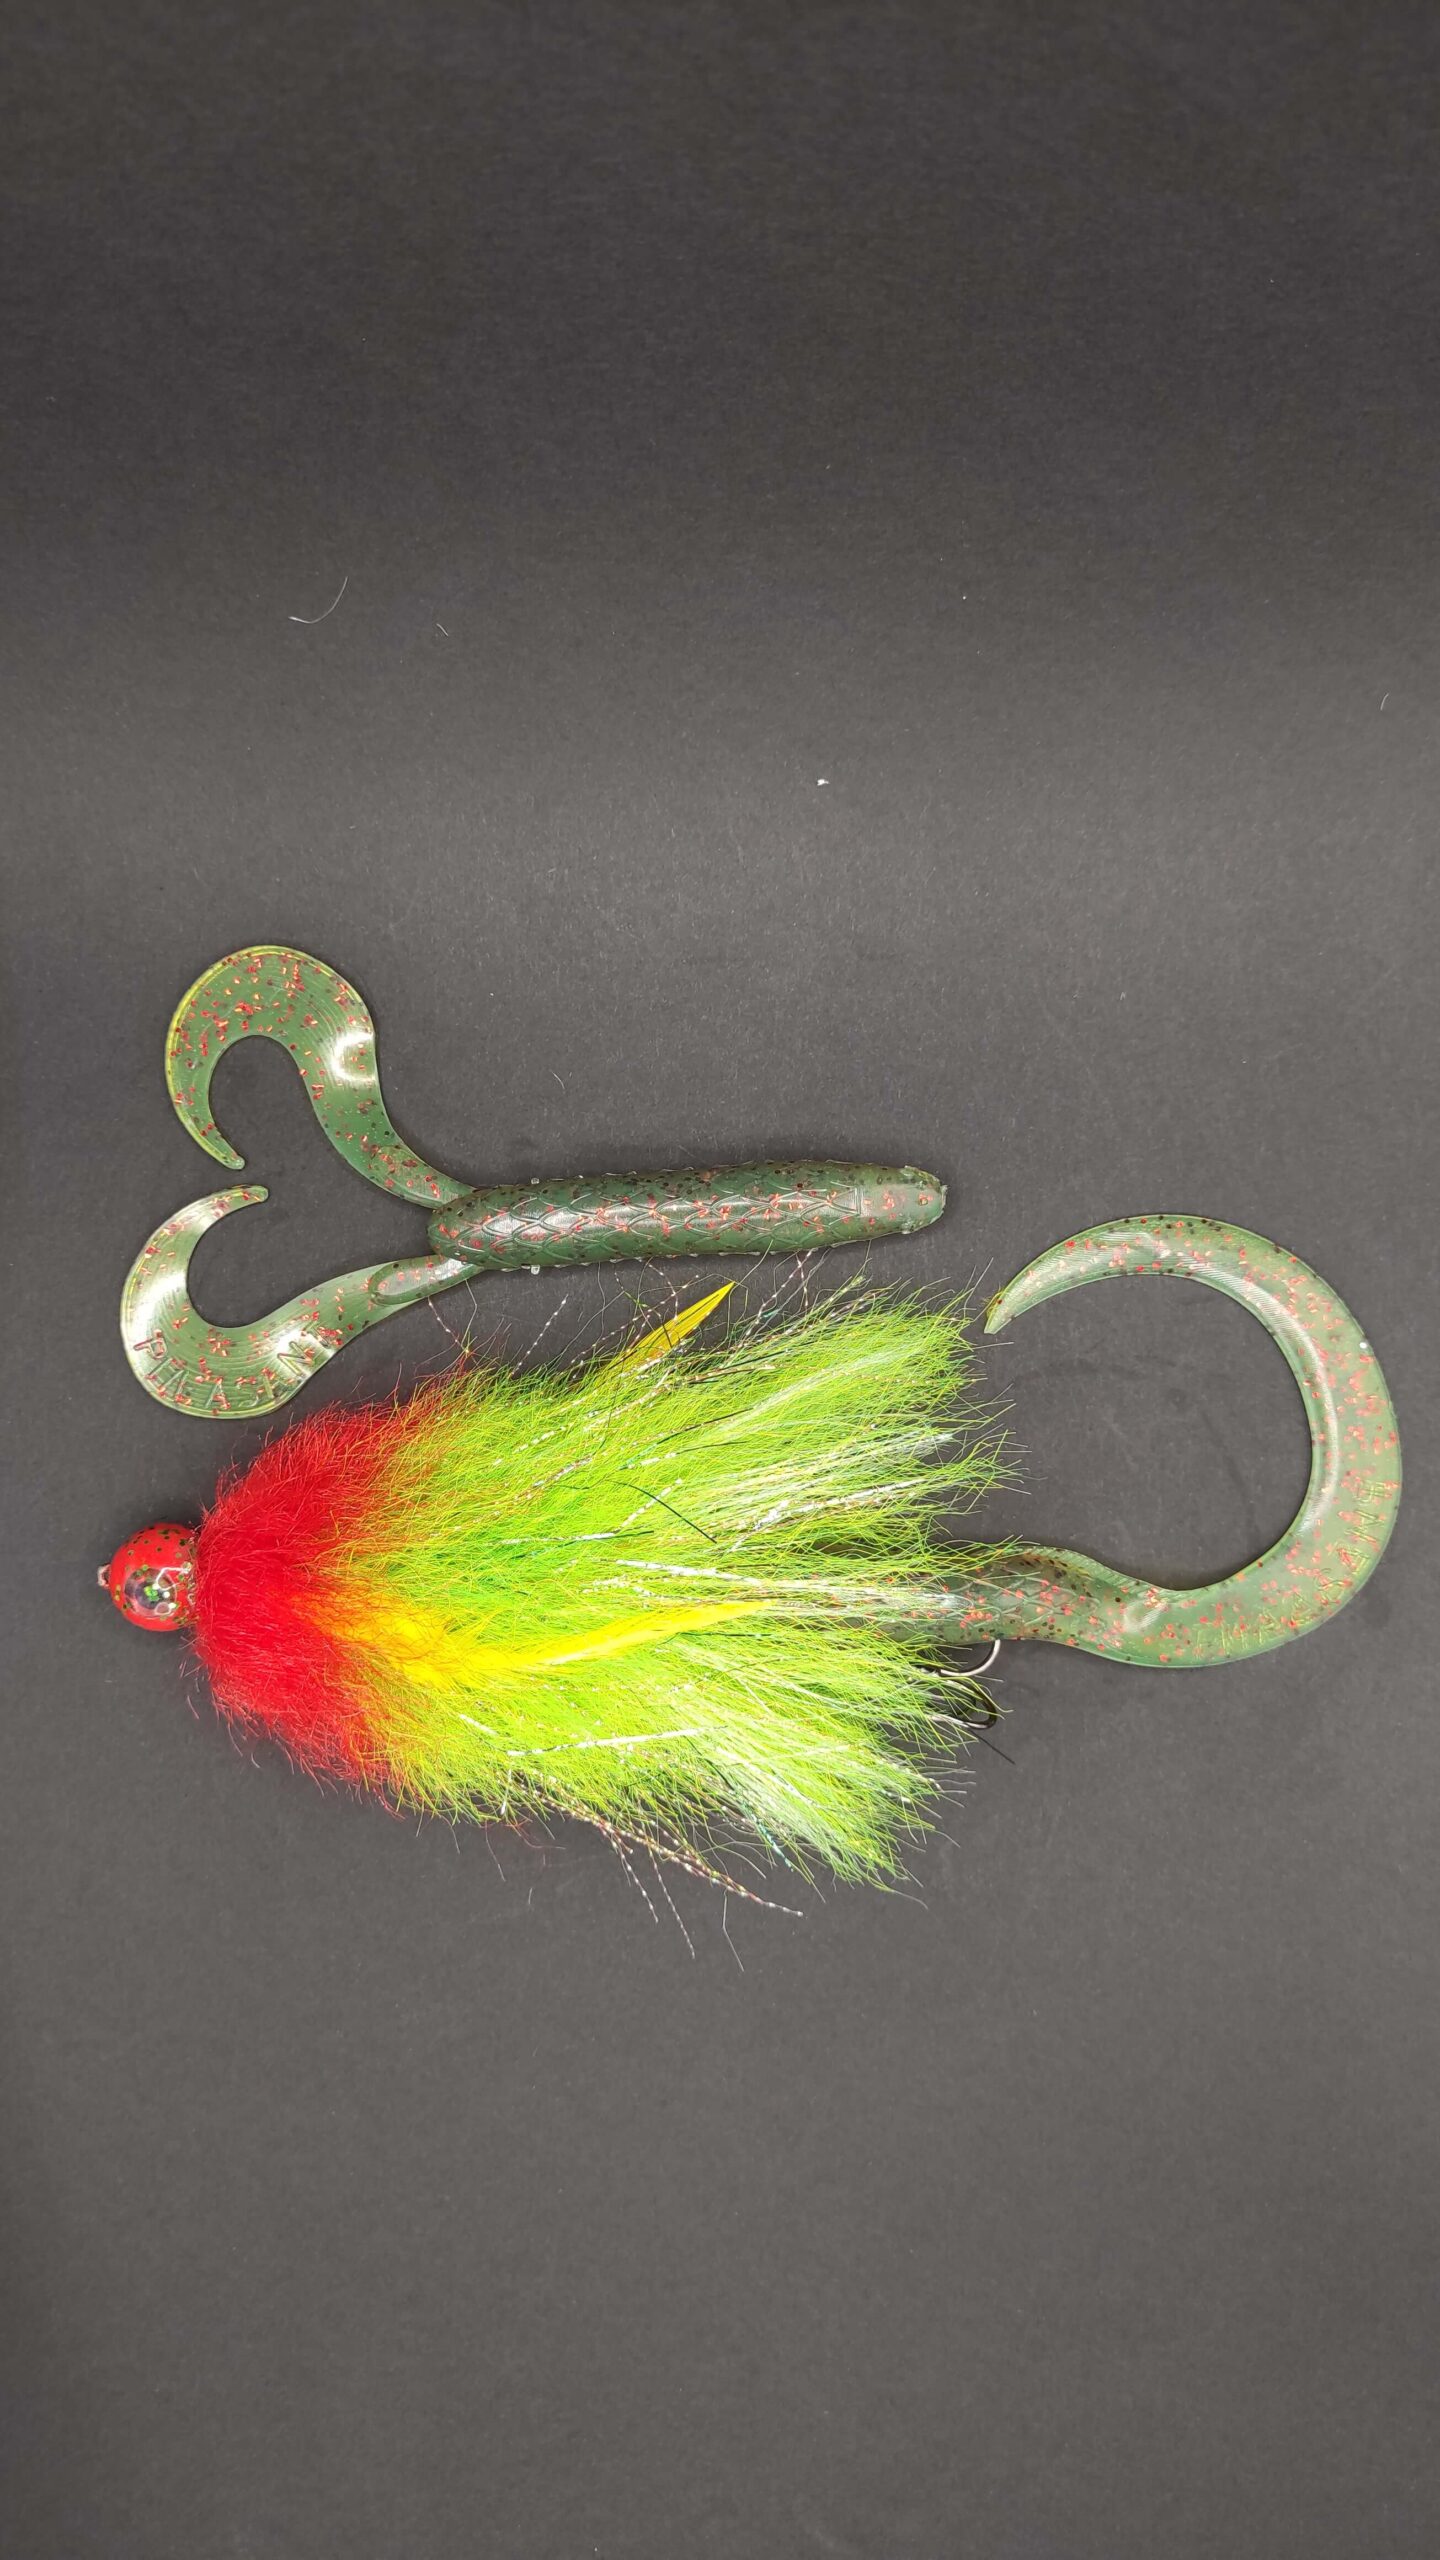 L.E.30gr. 25cm.2xhooks.6_0. Pink - Crafted Catches Lures Made with